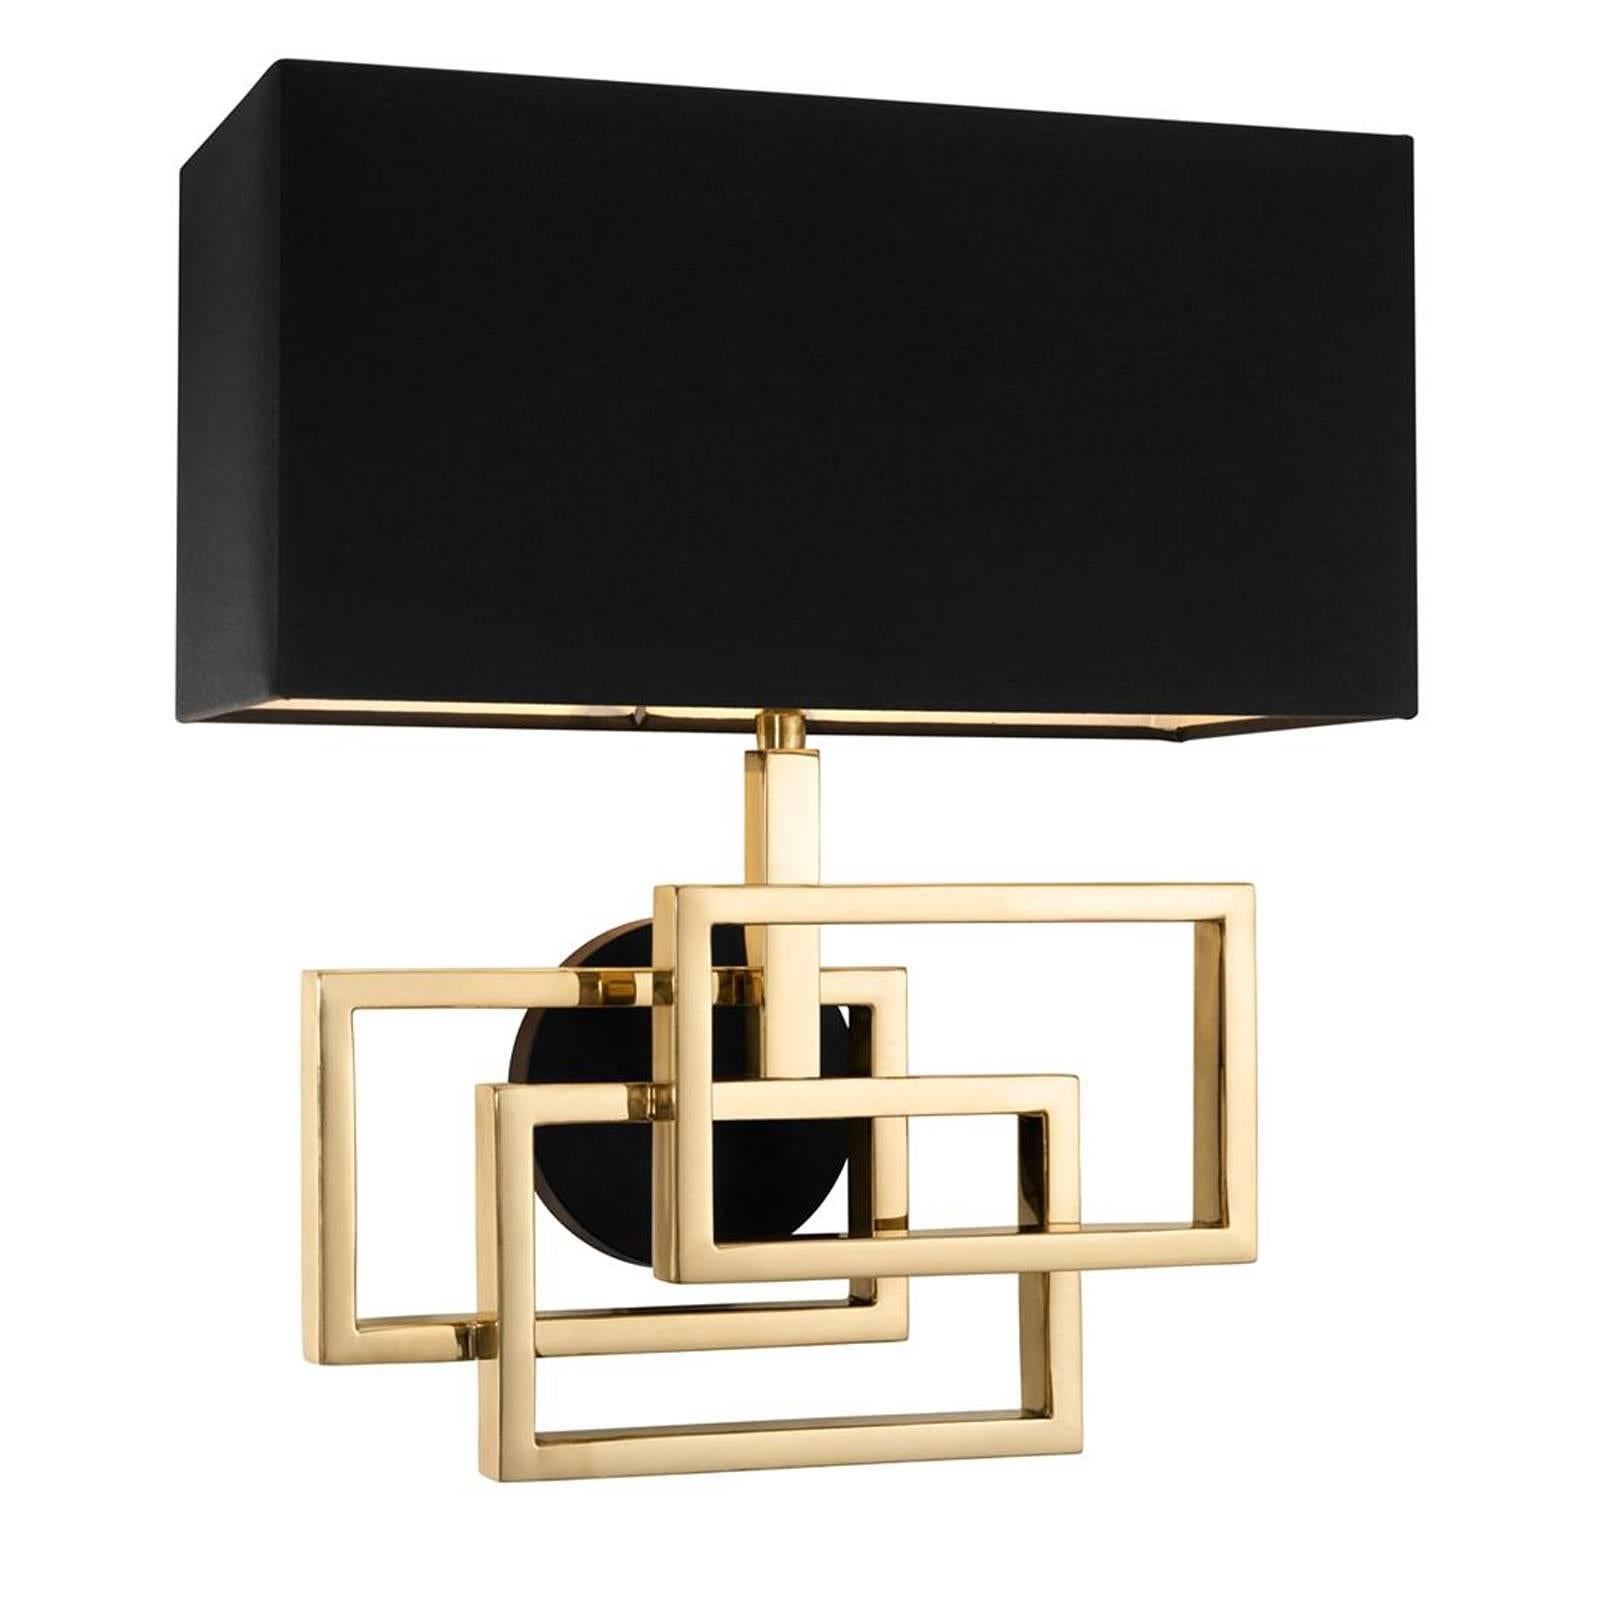 Frames Wall Lamp in Polished Brass or in Nickel Finish For Sale